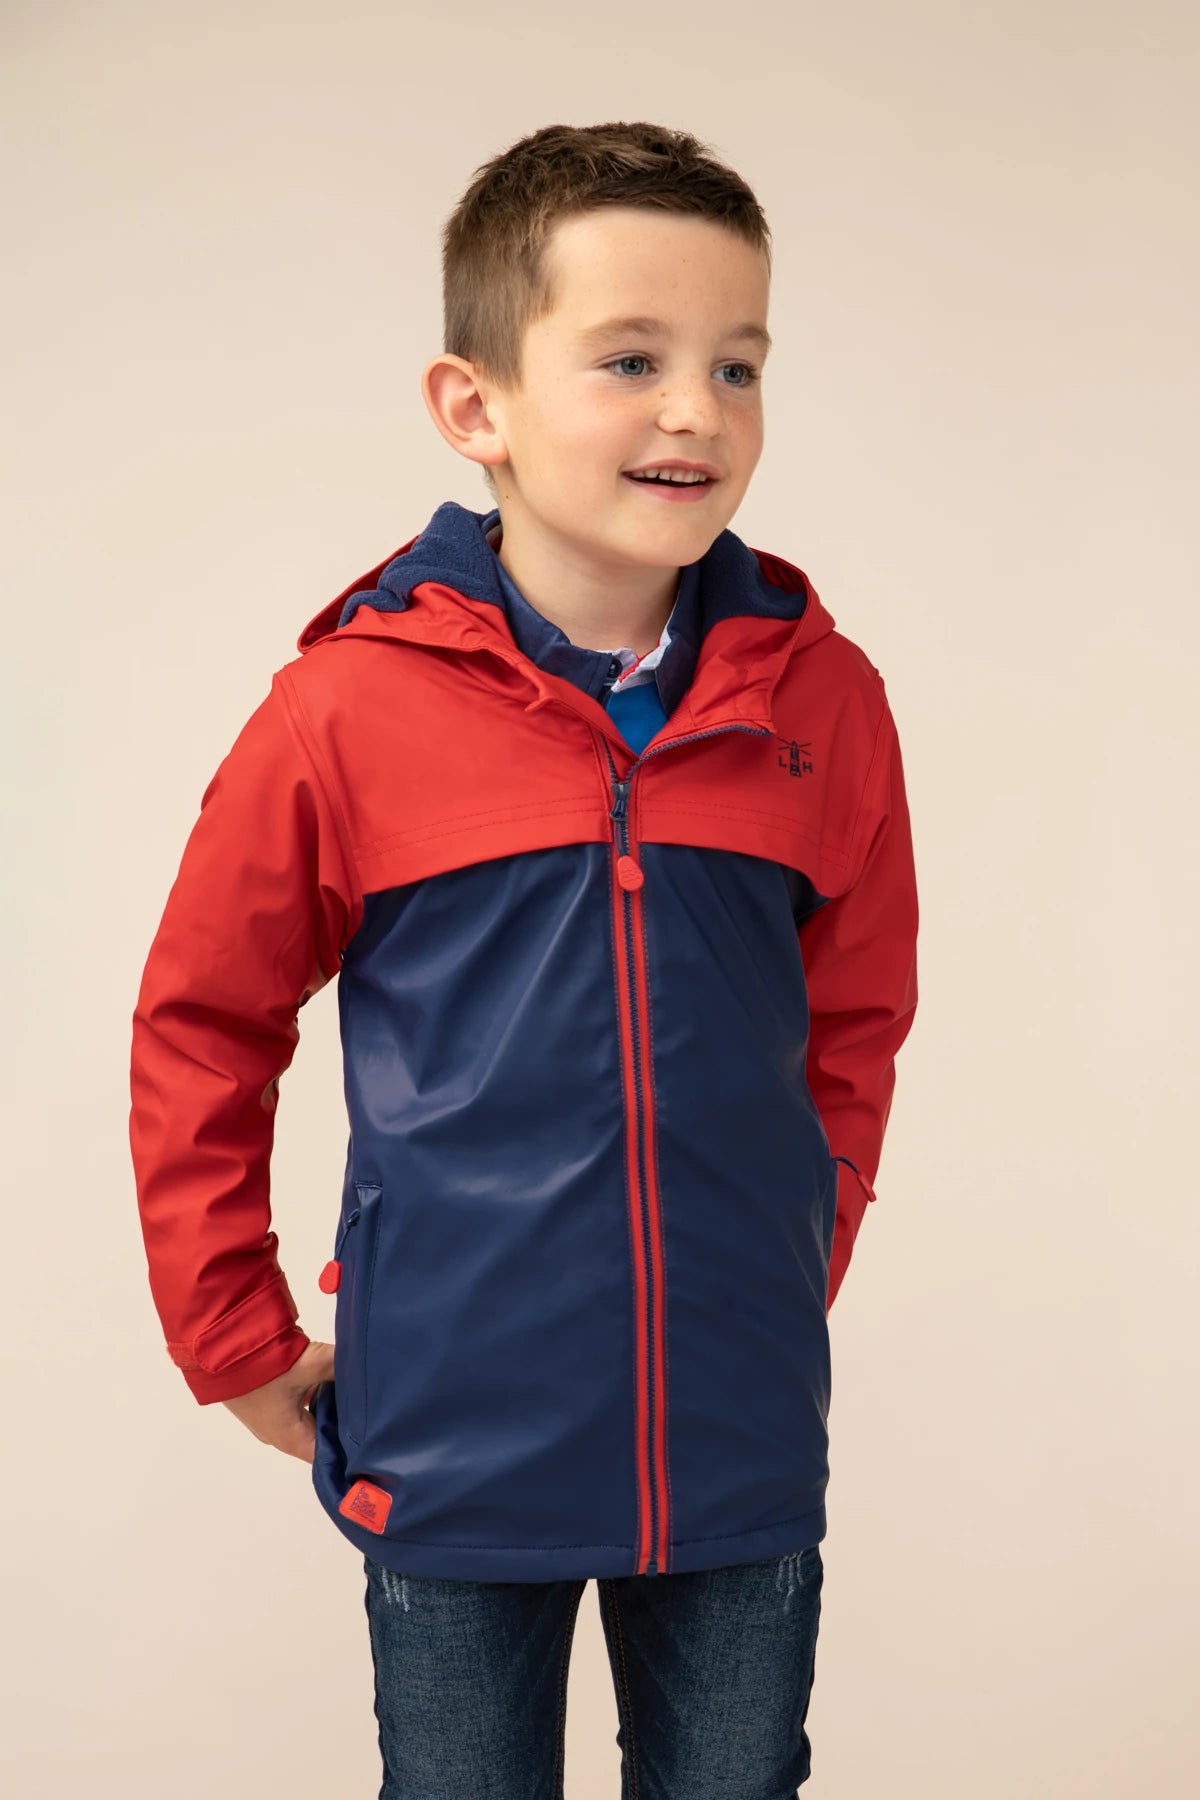 Lighthouse kids Adam waterproof rain coat in two tone red and navy.